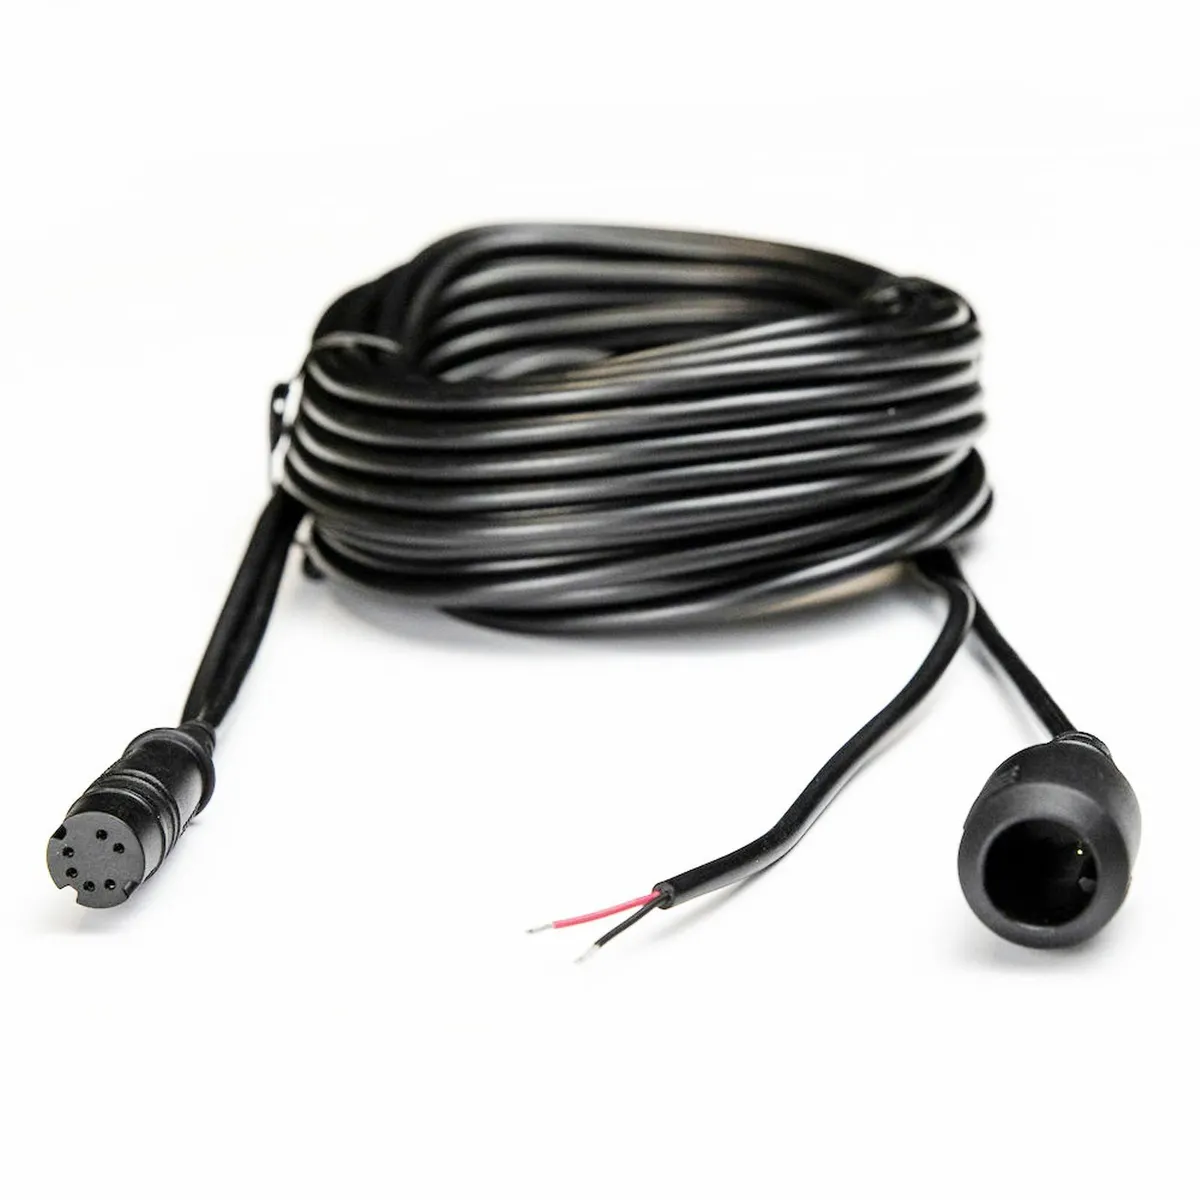 Lowrance Hook2 4x Bullet 10ft Transducer Extension Cable - 000-14413-001